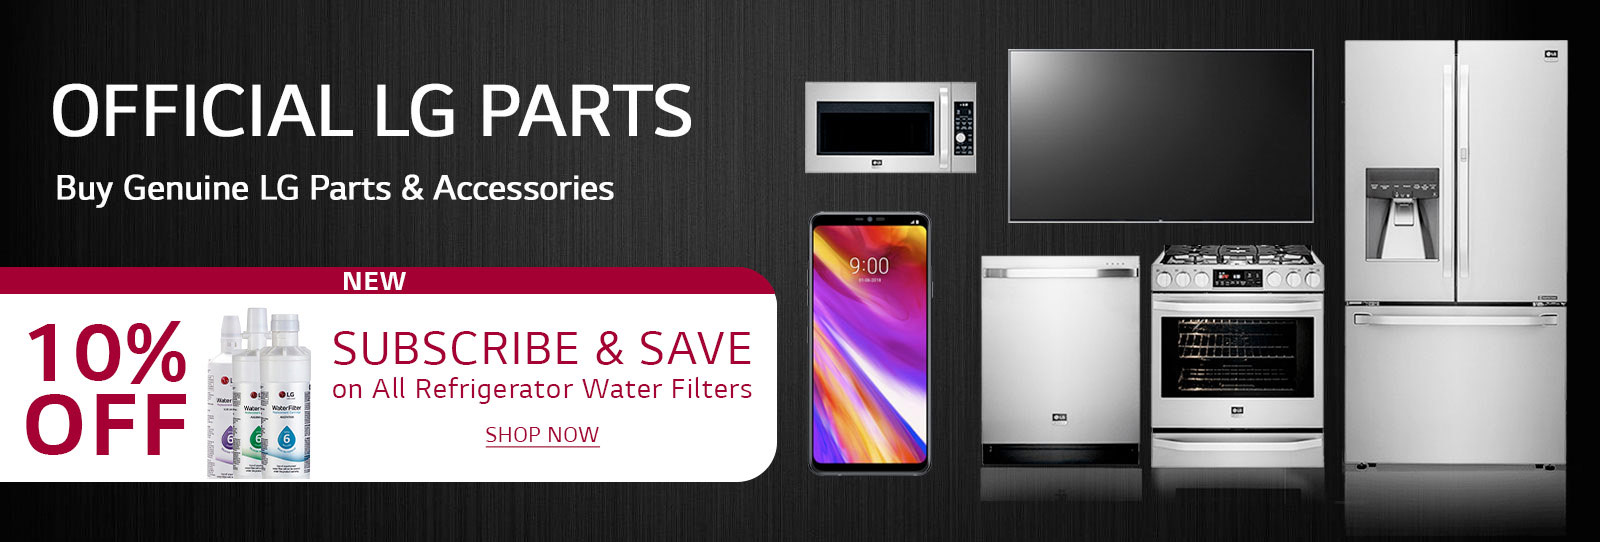 Official LG Parts - Buy Genuine LG Parts & Accessories